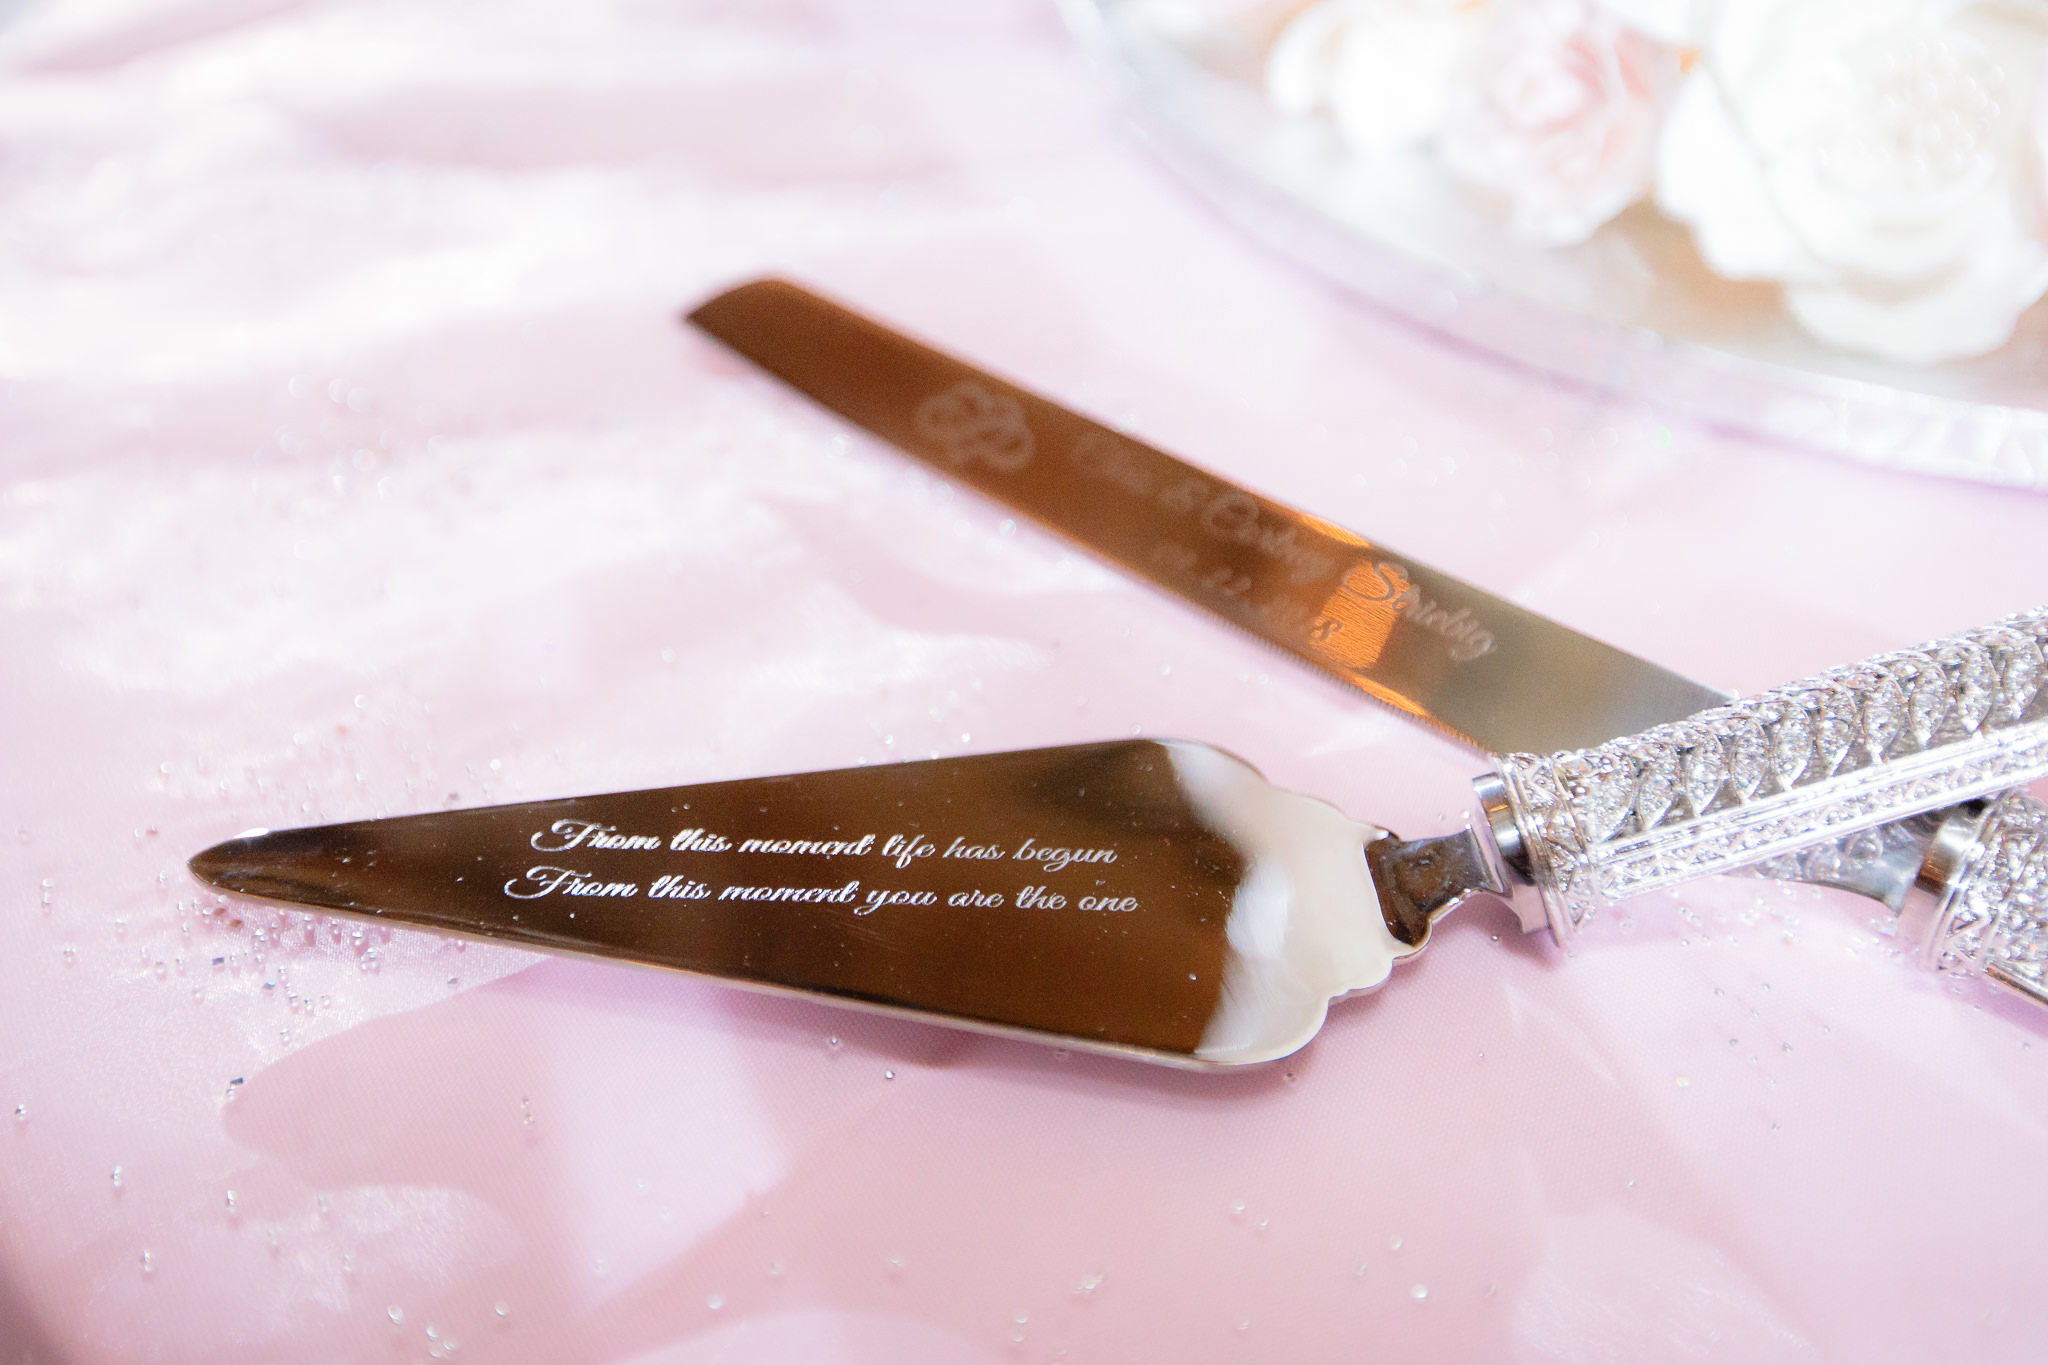 Cake knife inscribed with the wedding date and a quote at the Pennsylvanian